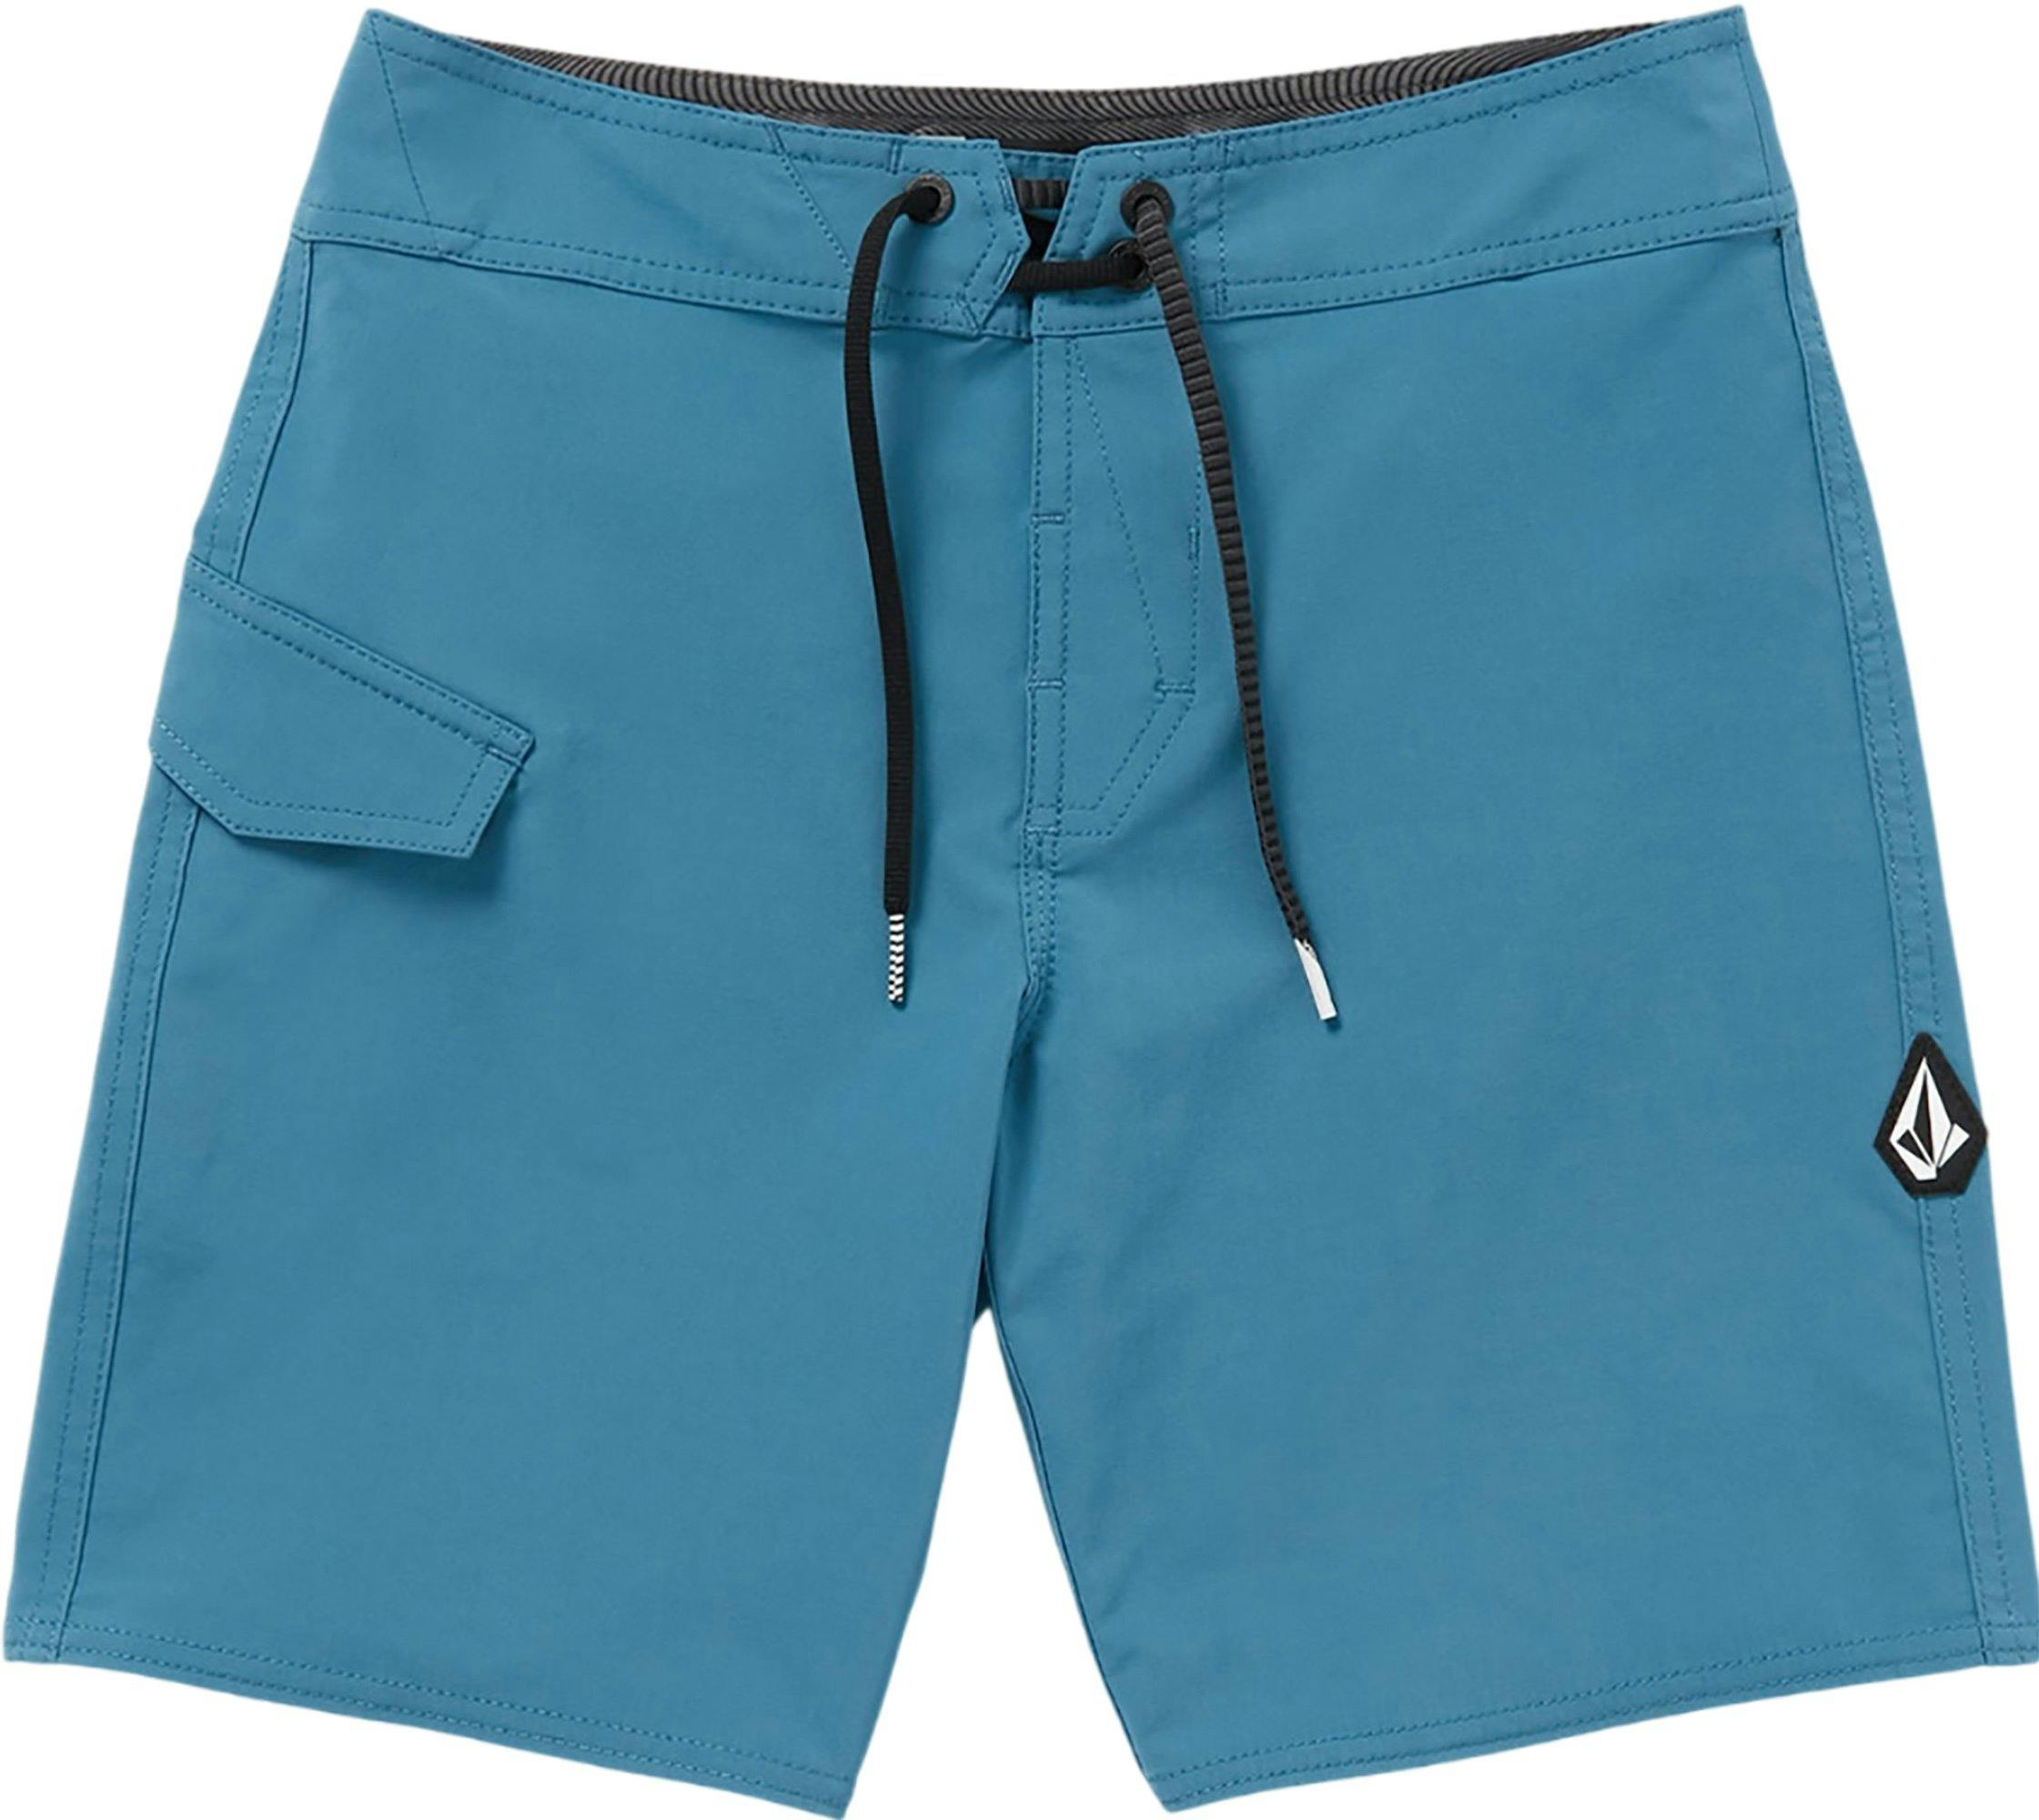 Product image for Lido Solid Mod Tech Trunks - Big Boys